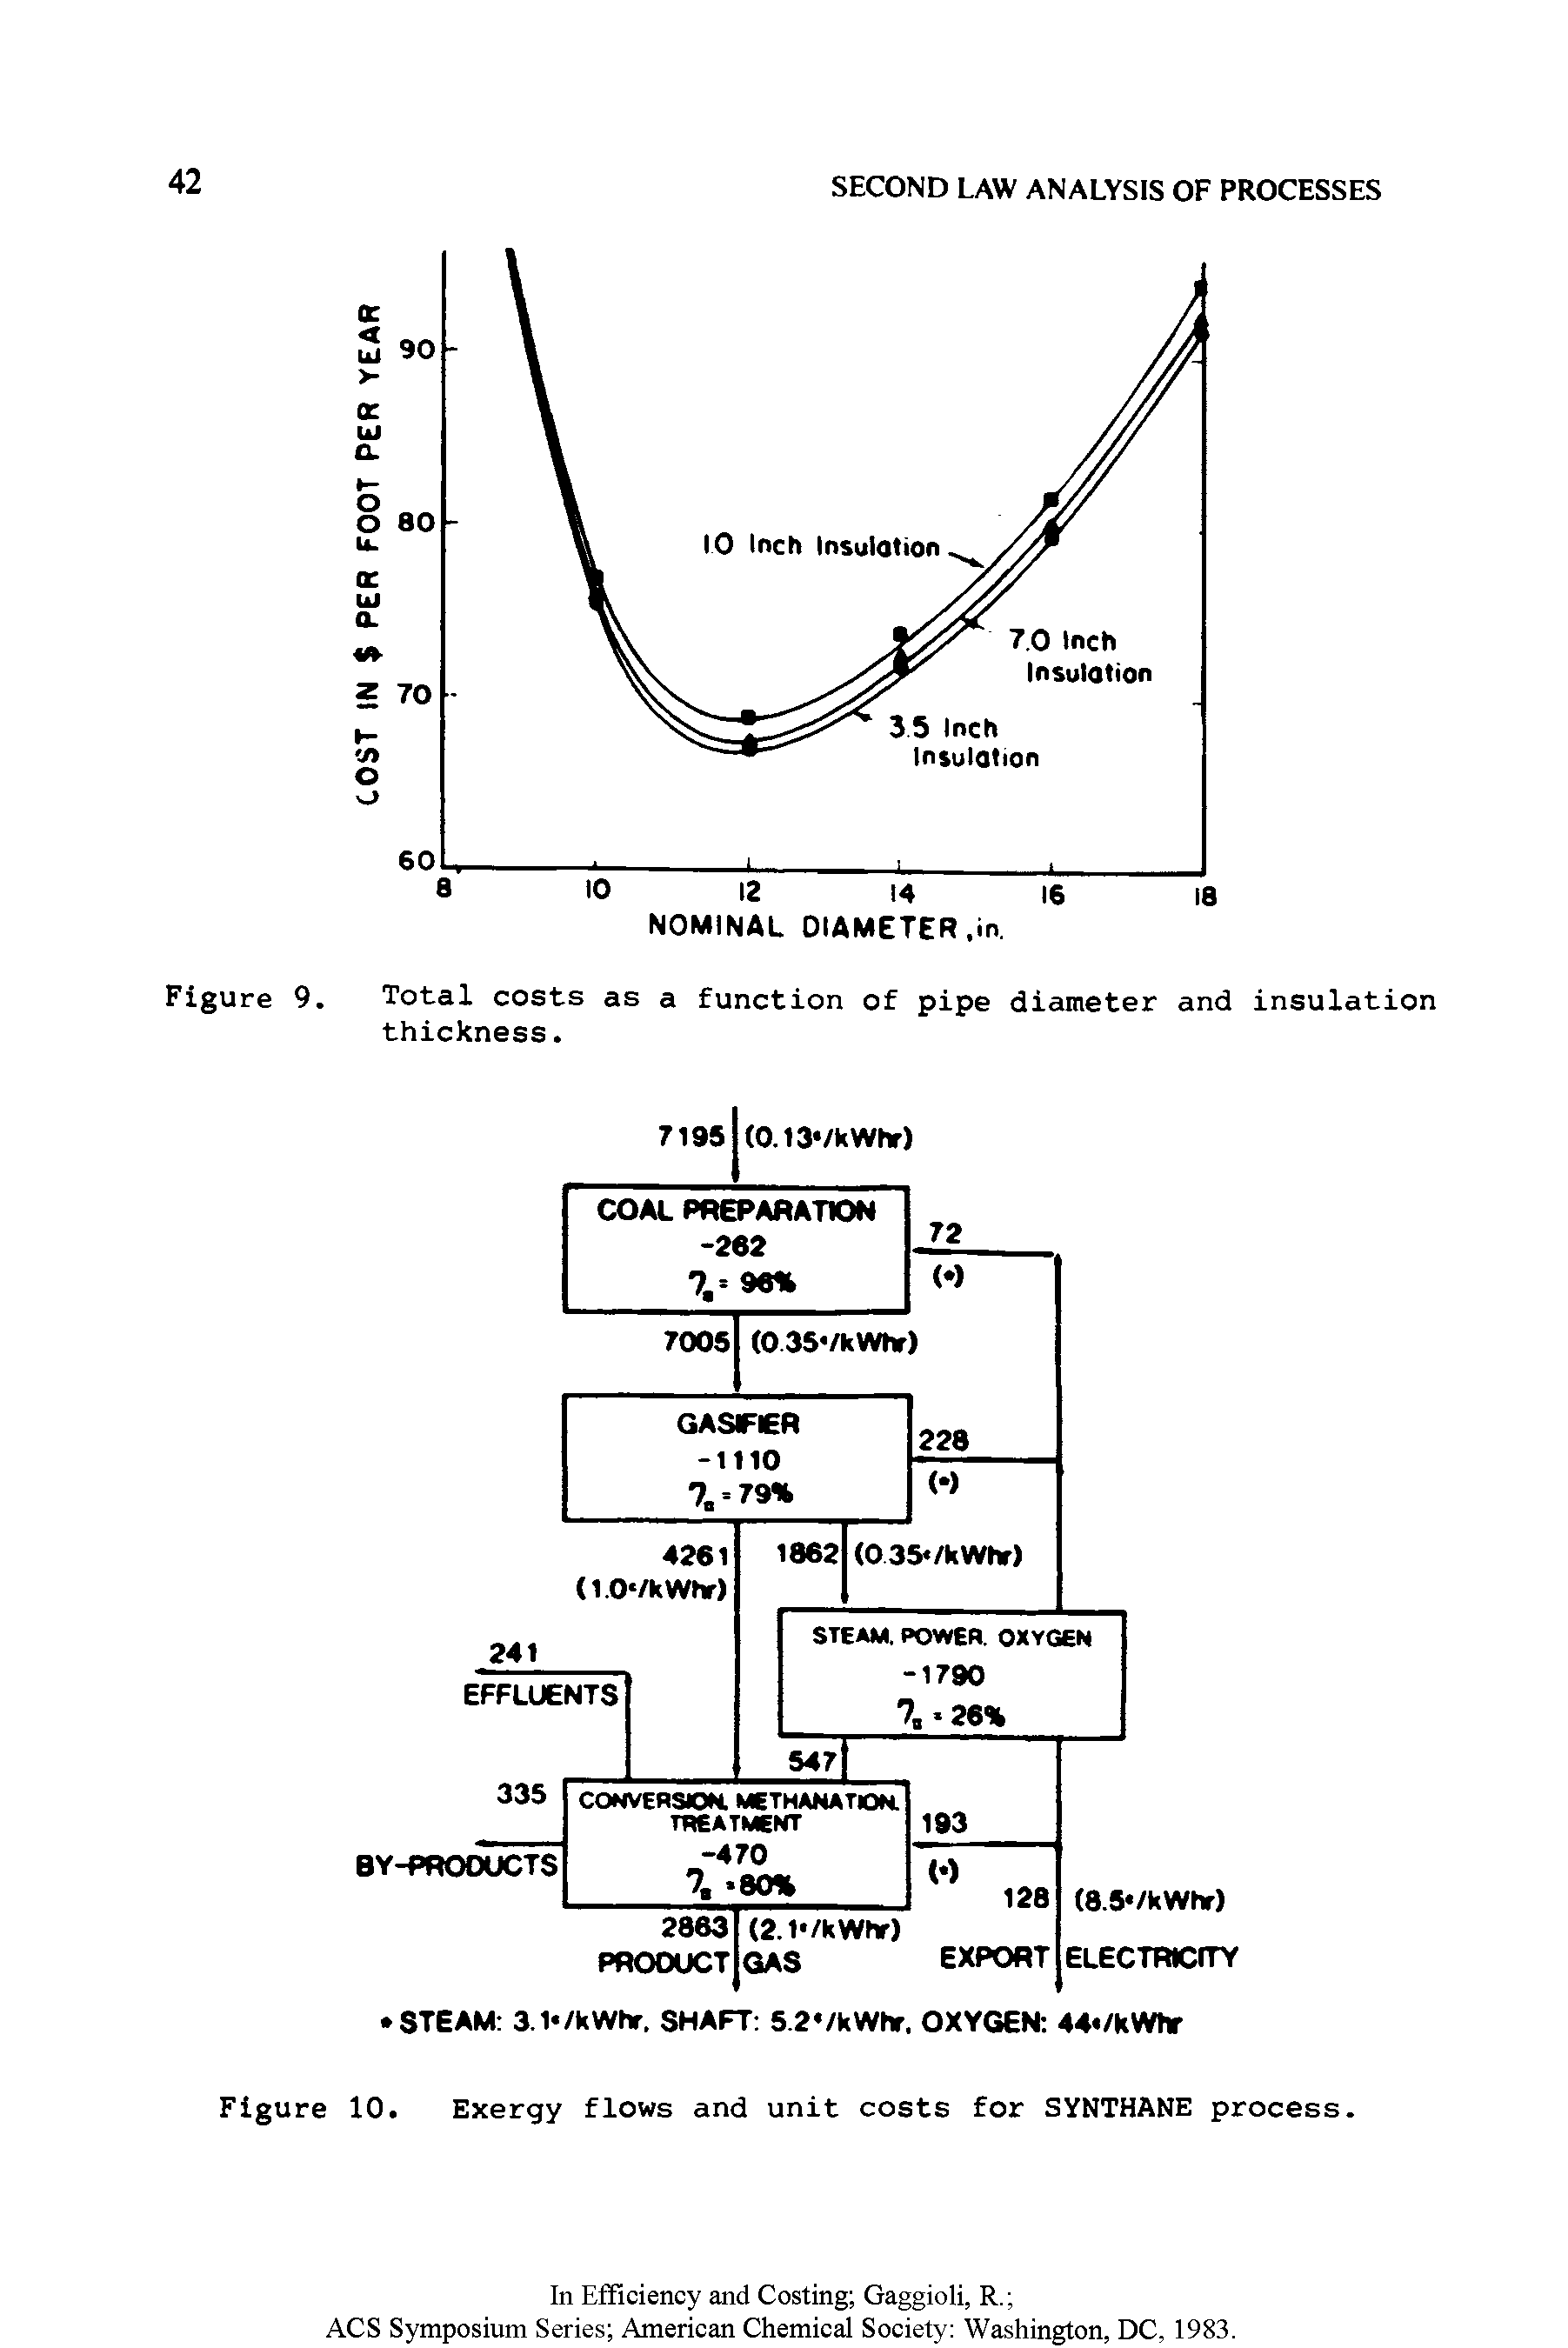 Figure 10. Exergy flows and unit costs for SYNTHANE process.